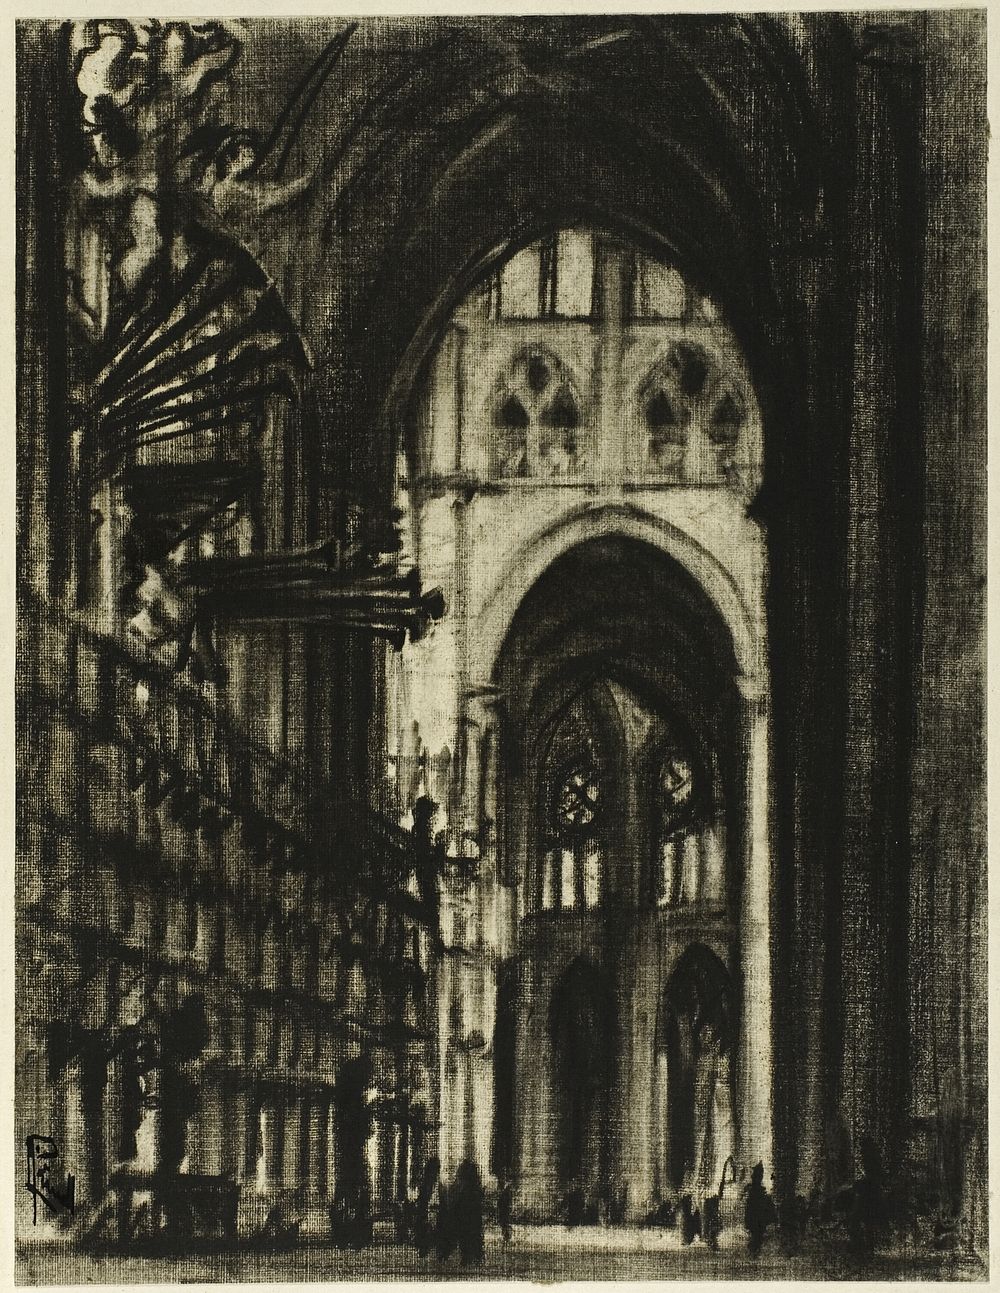 The Gilded Organ Pipes by Joseph Pennell